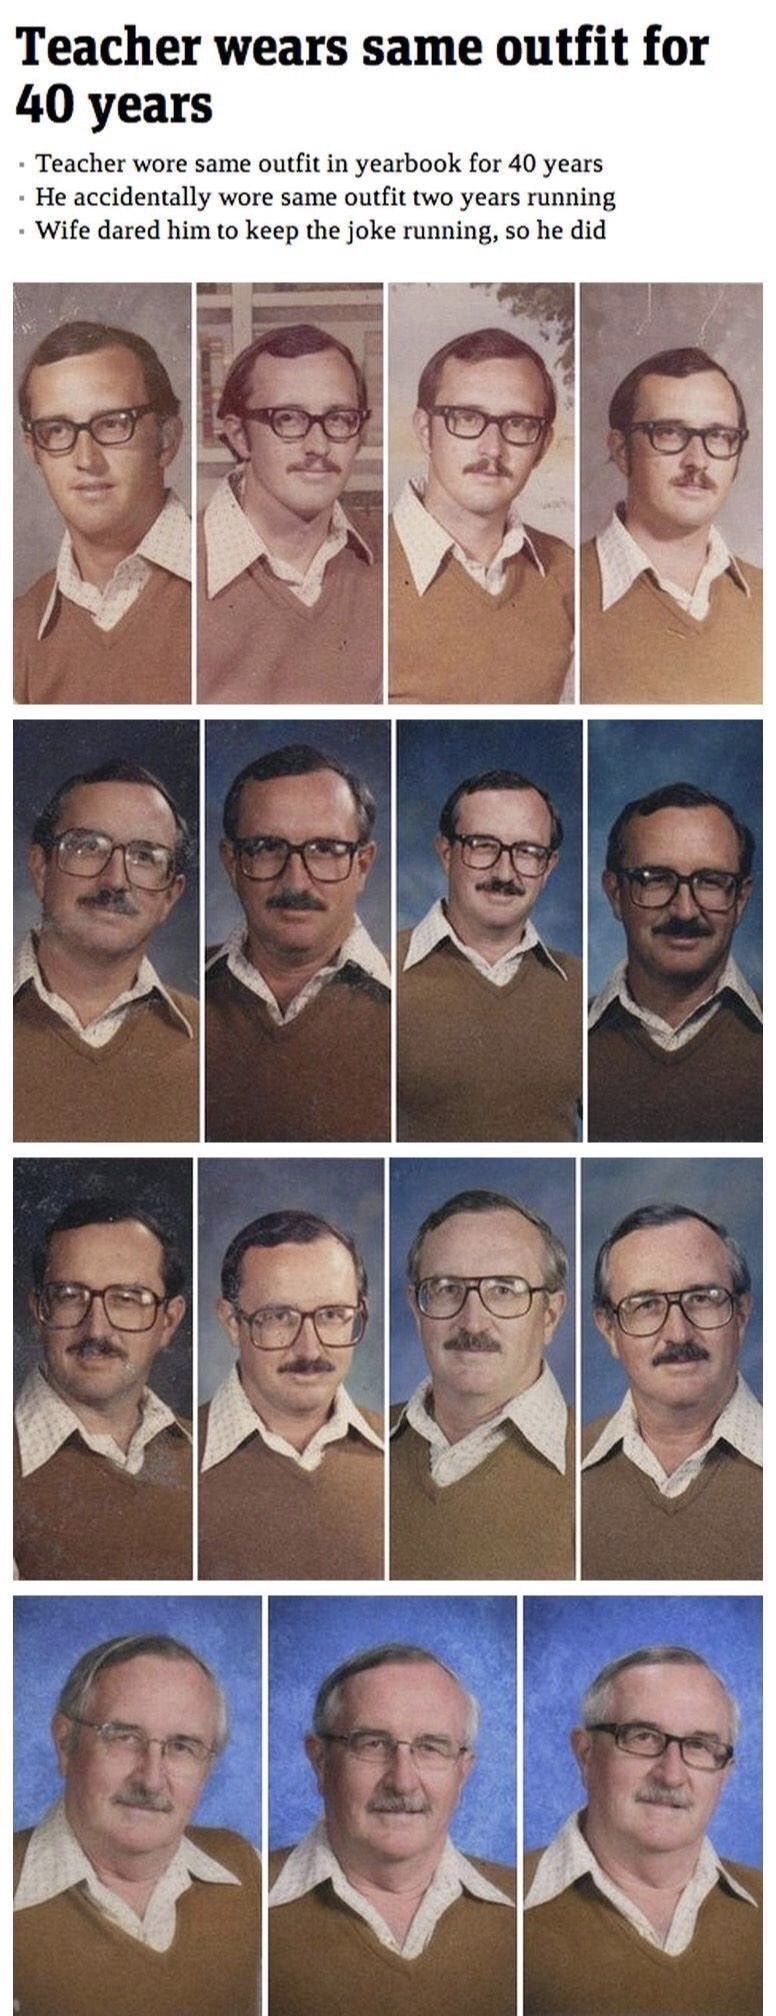 outfit 40 años meme - Teacher wears same outfit for 40 years Teacher wore same outfit in yearbook for 40 years He accidentally wore same outfit two years running Wife dared him to keep the joke running, so he did